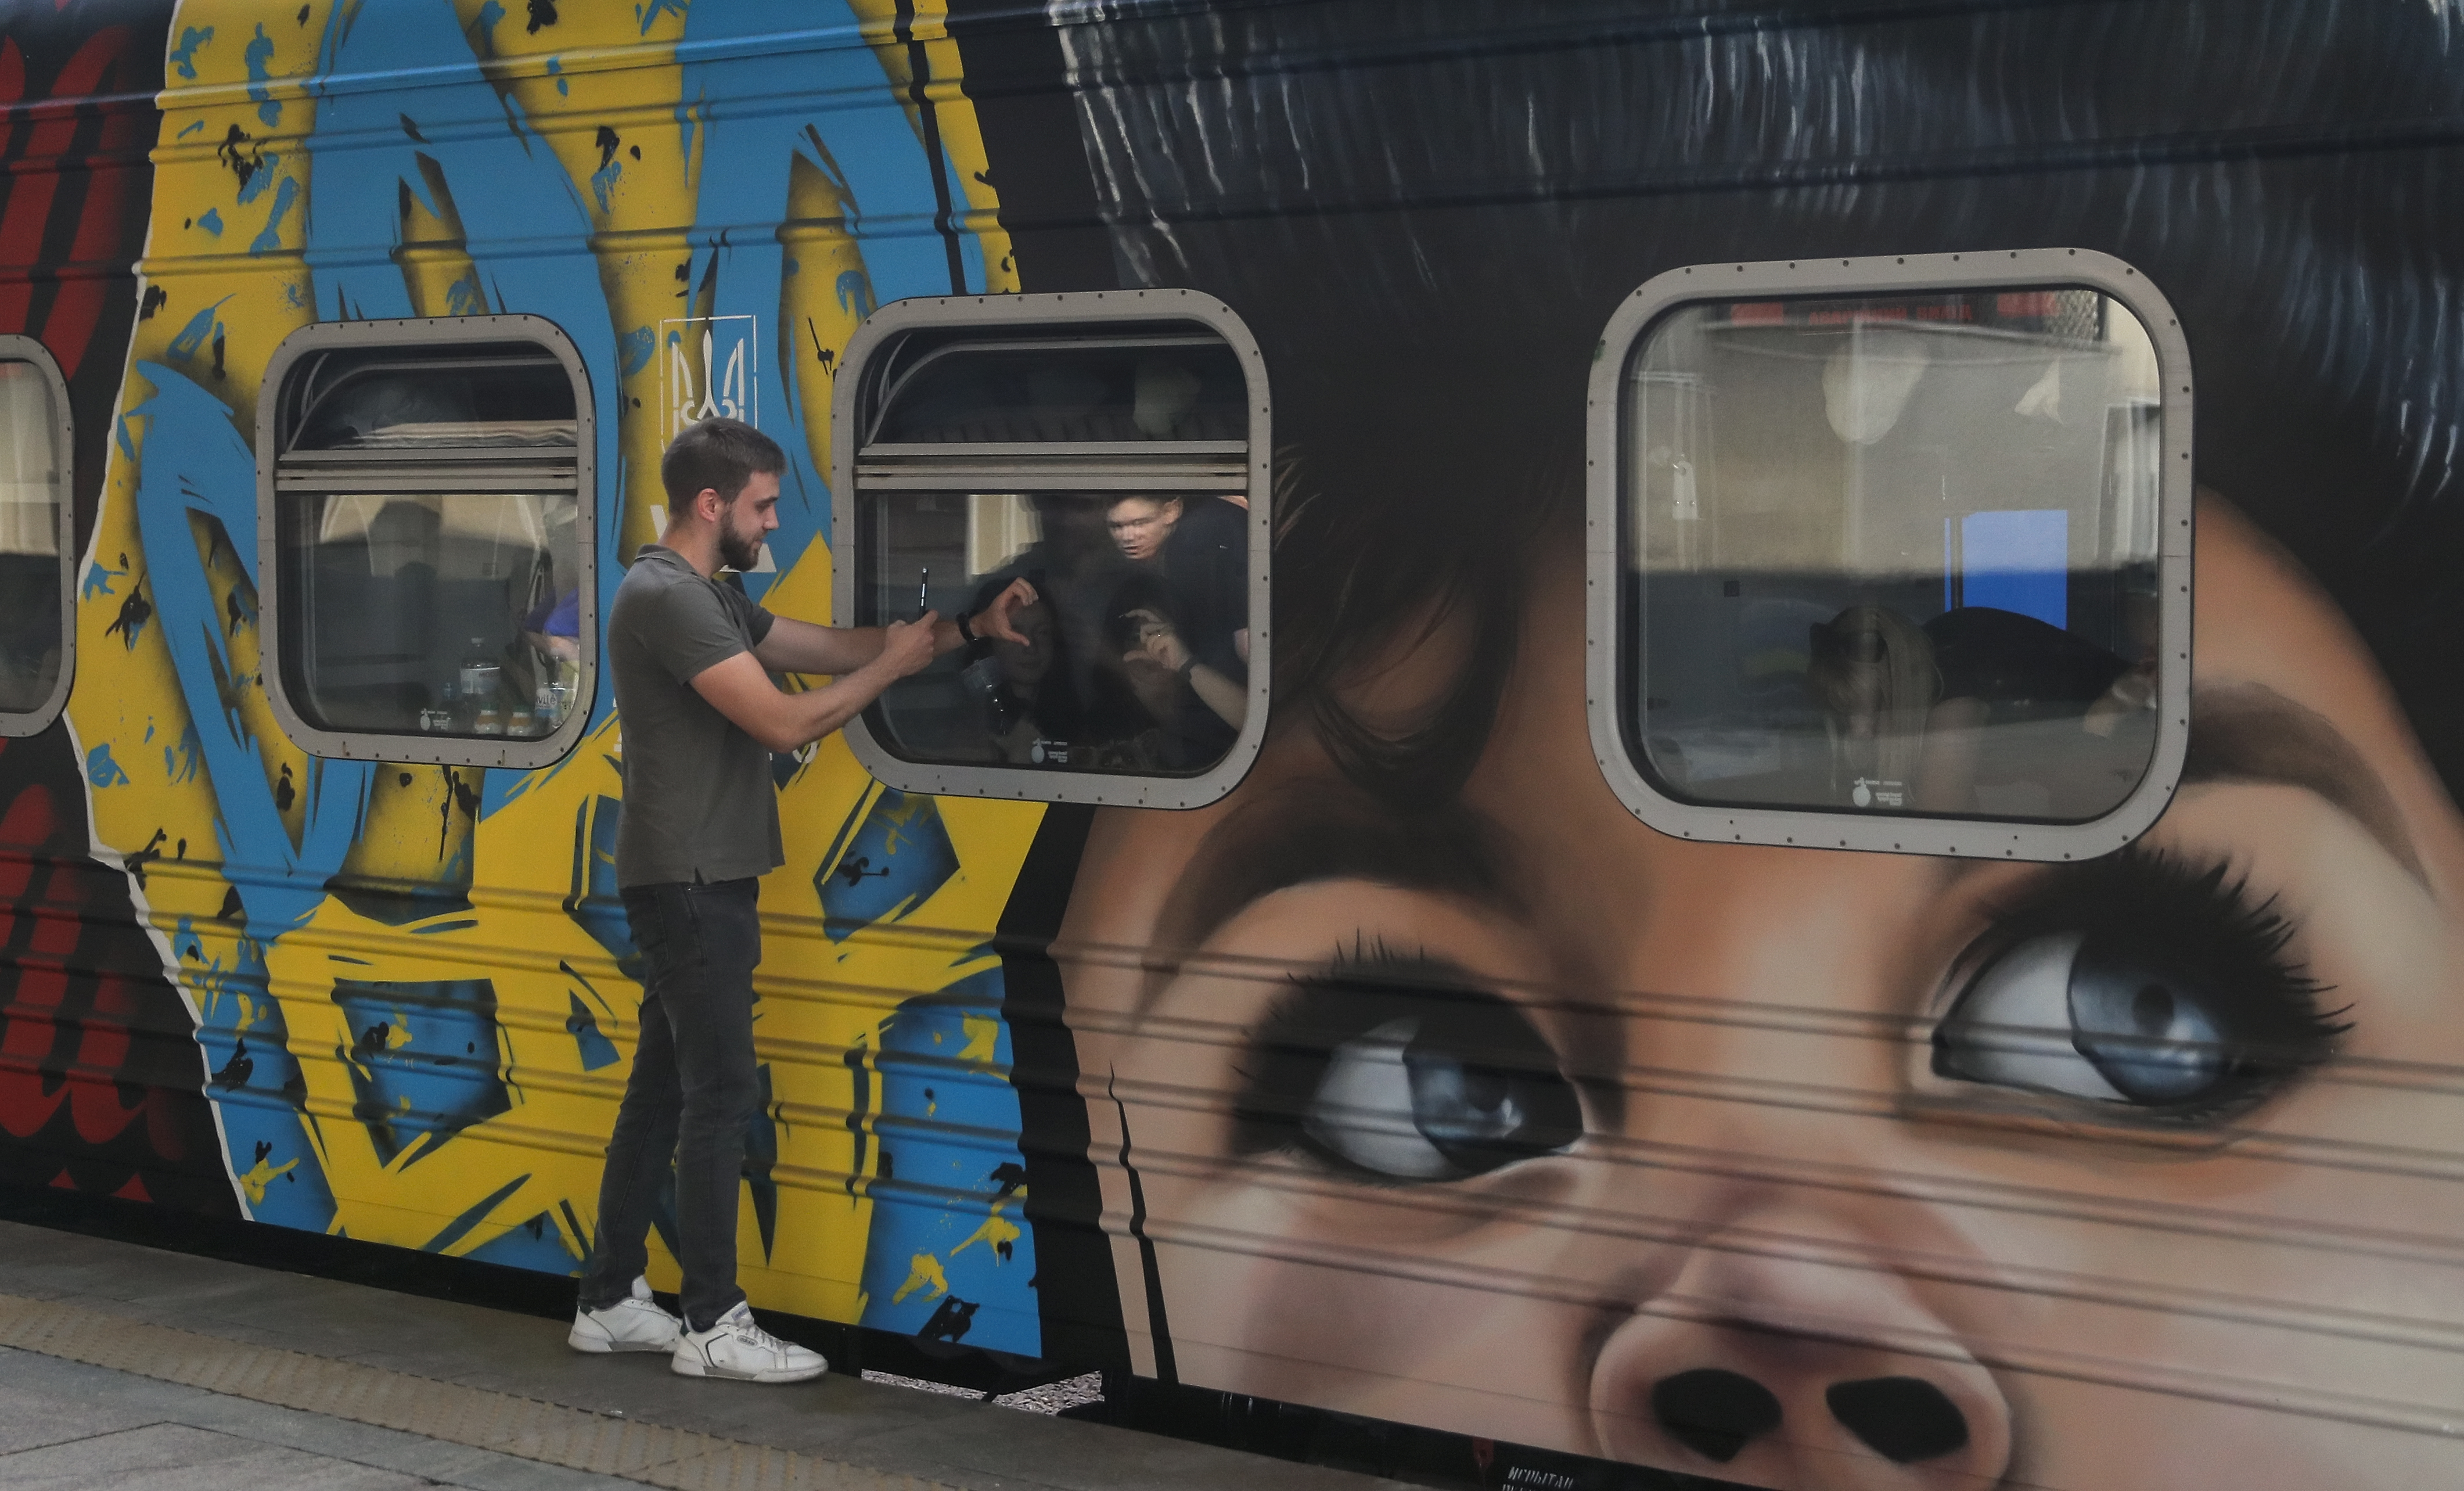 Ukrainians say goodbye to the passengers of the train named The Train to Victory' at the railway station in Kyiv, Ukraine, 23 August 2022. The Train to Victory project consists of seven train cars painted by Ukrainian artists. Each car is dedicated to the temporarily occupied territories of Ukraine and the feats of Ukrainians resisting Russian invasion. The Train to Victory left Kyiv for its first trip and will arrive in the Western Ukrainian city of Uzhgorod on Independence Day on 24 August. EPA-EFE/SERGEY DOLZHENKO